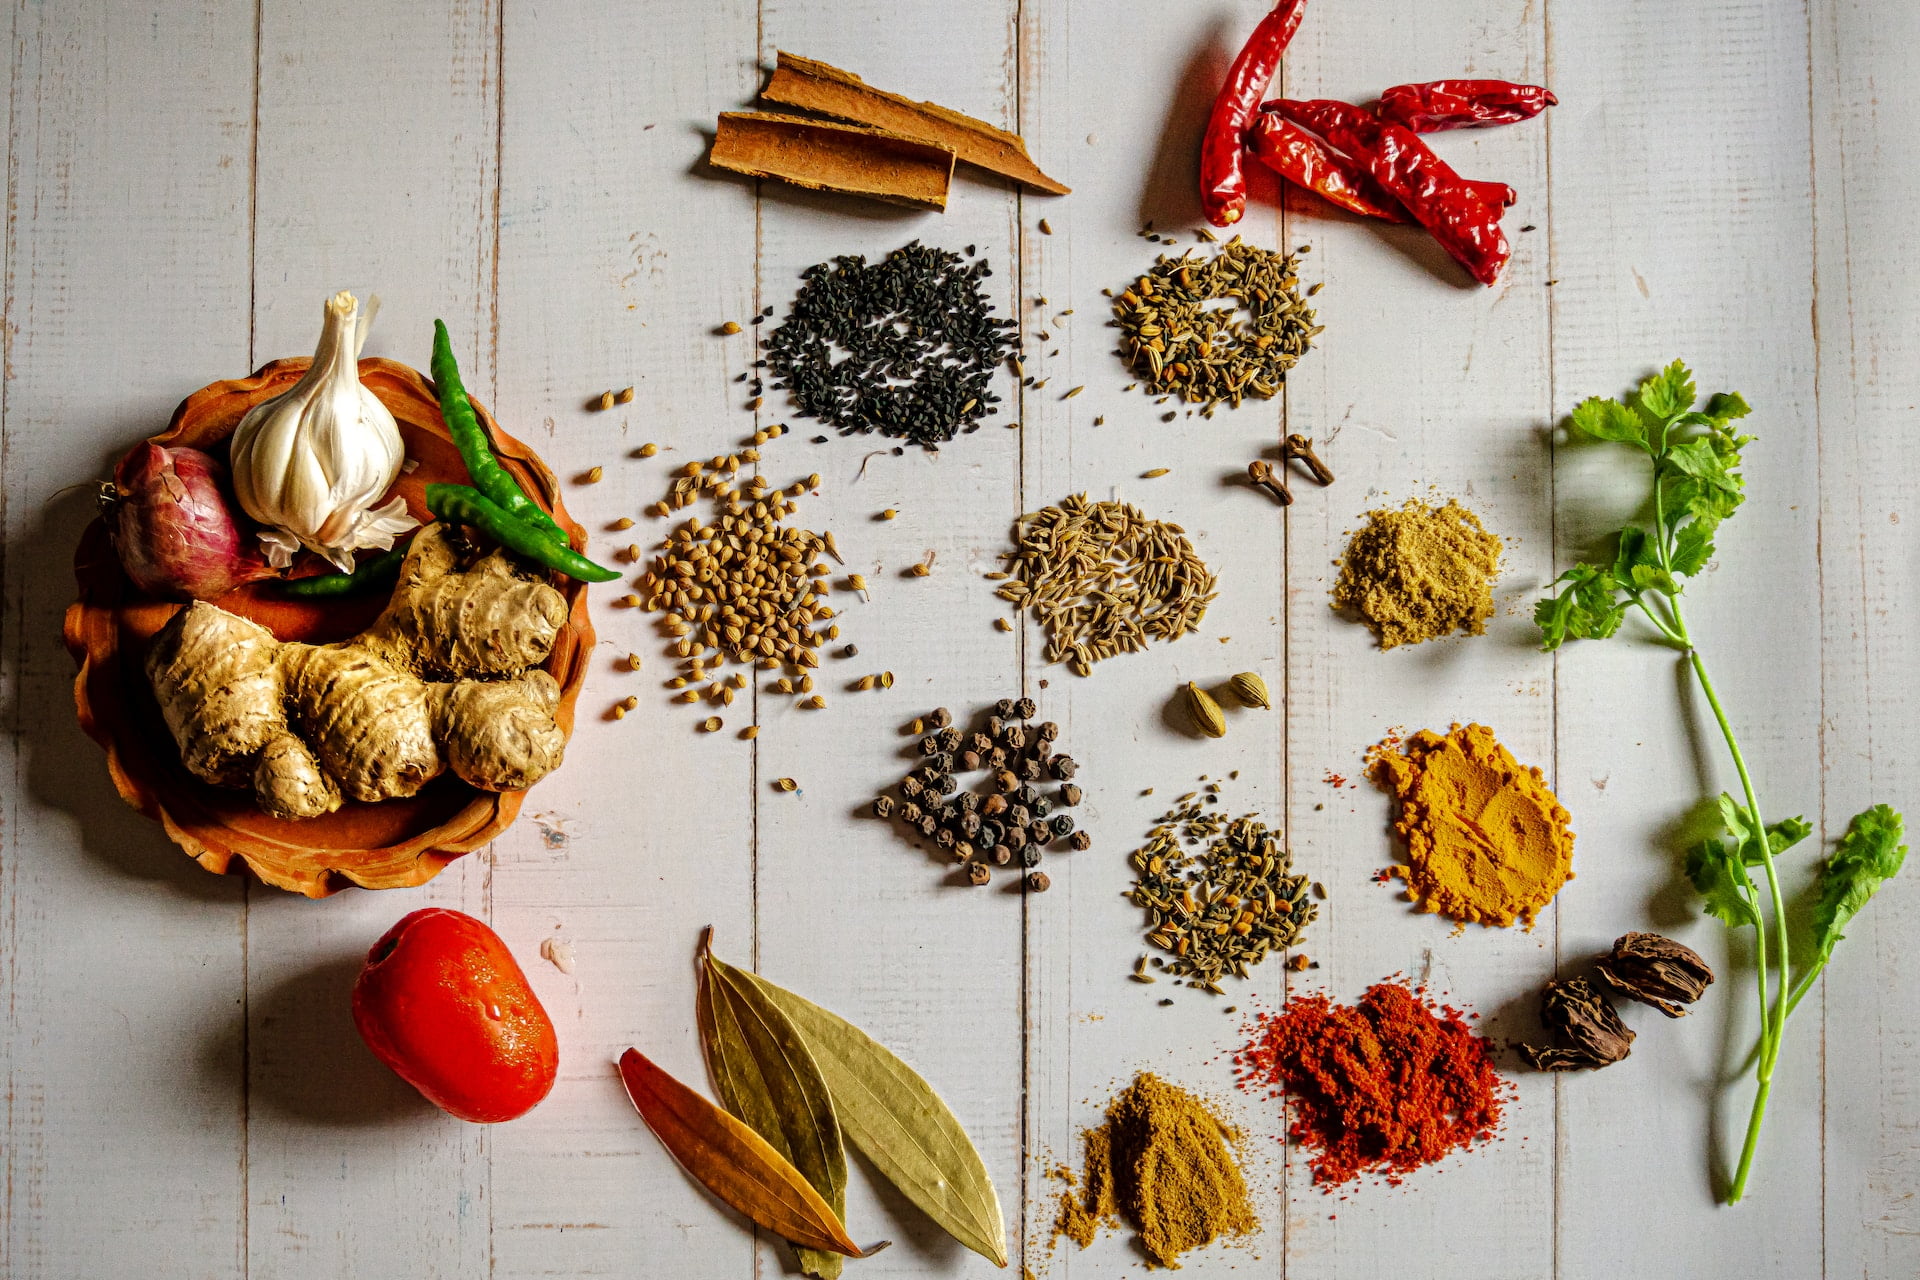 The Health Benefits of Top 10 Spices. Enhancing Flavor and Well-Being